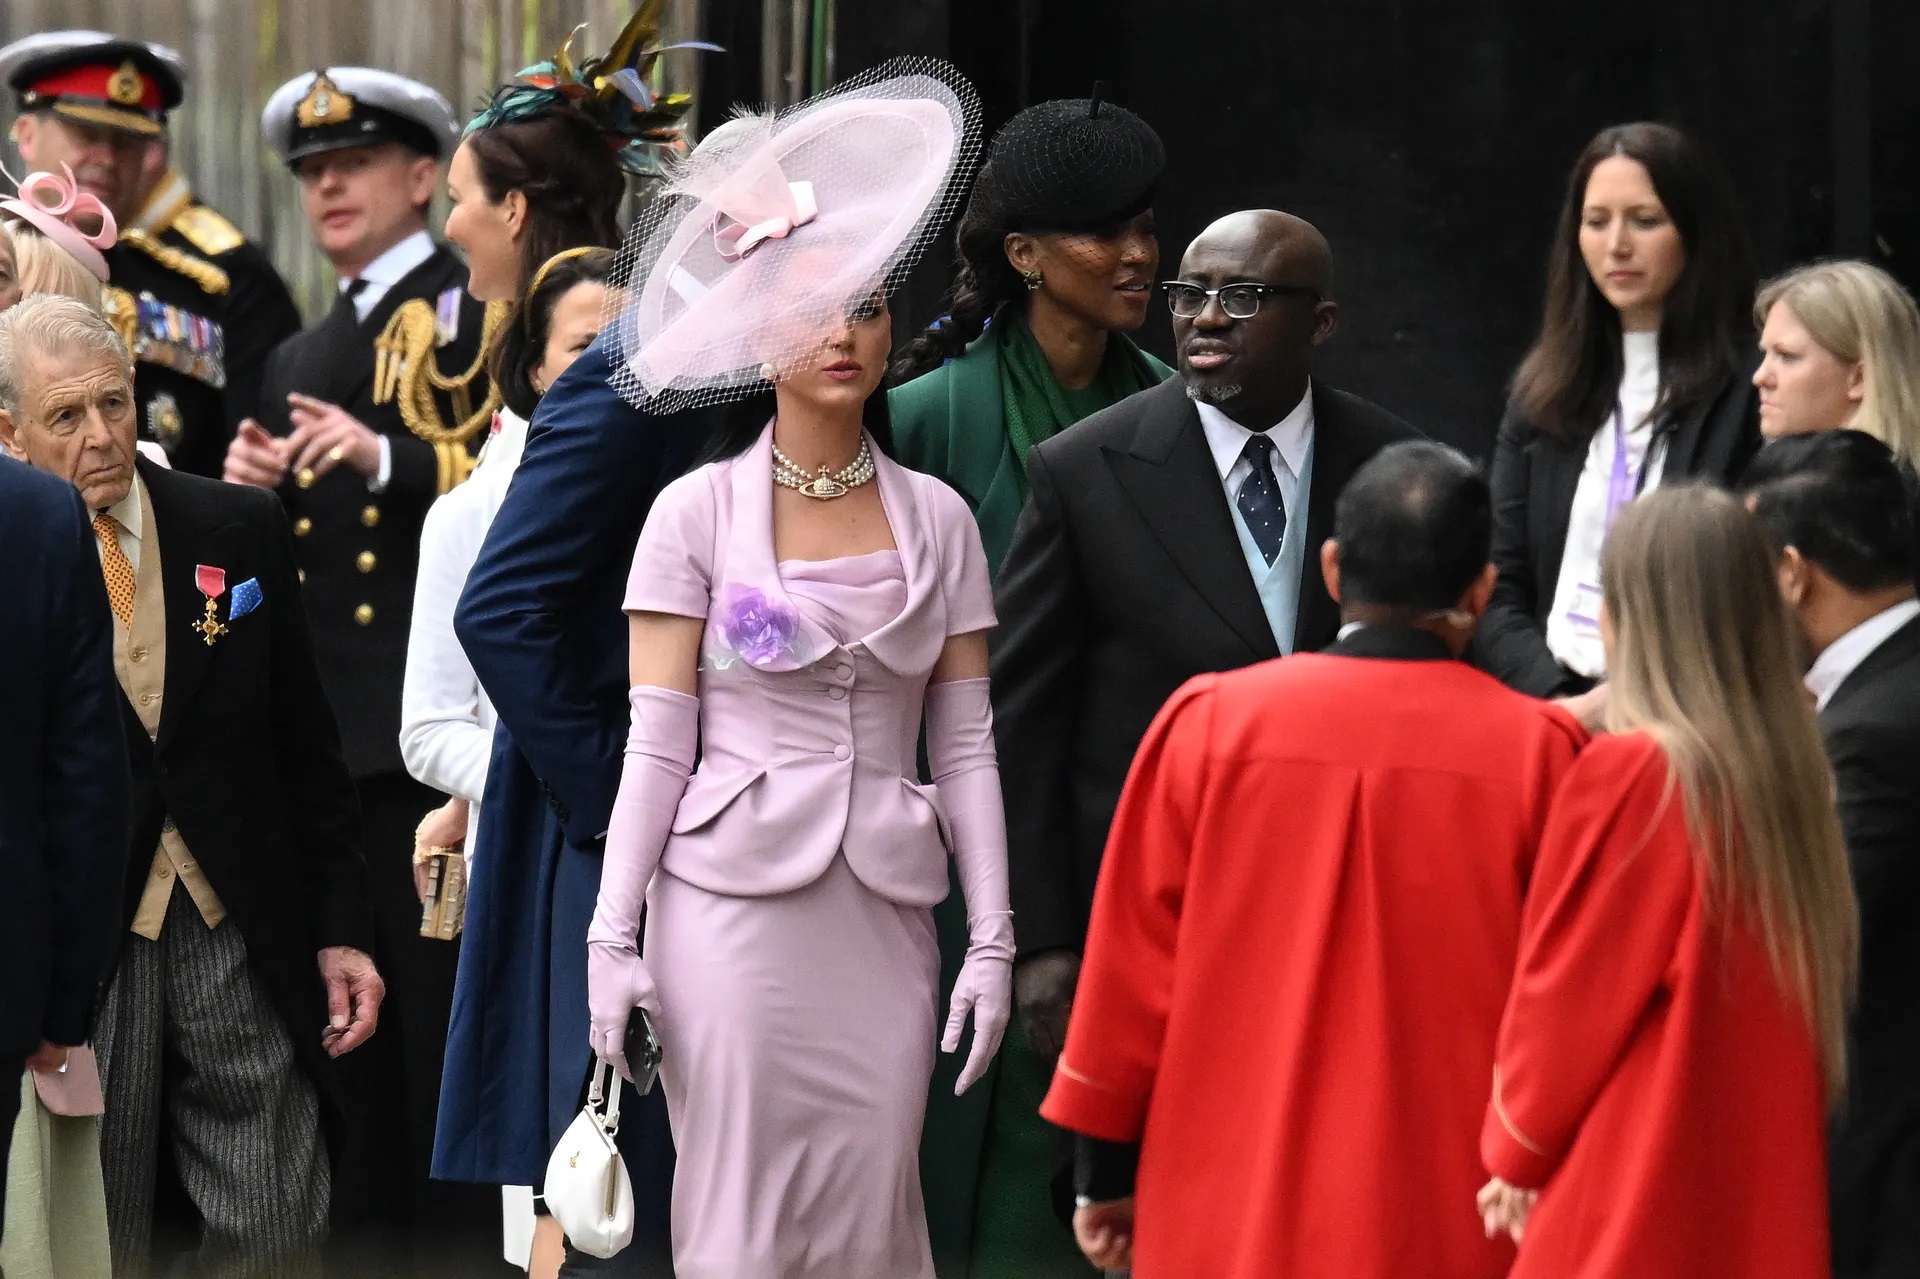 katy_perry_arriving_with_british_vogue_editor-in-chief_and_european_editorial_director_edward_enninful.jpg